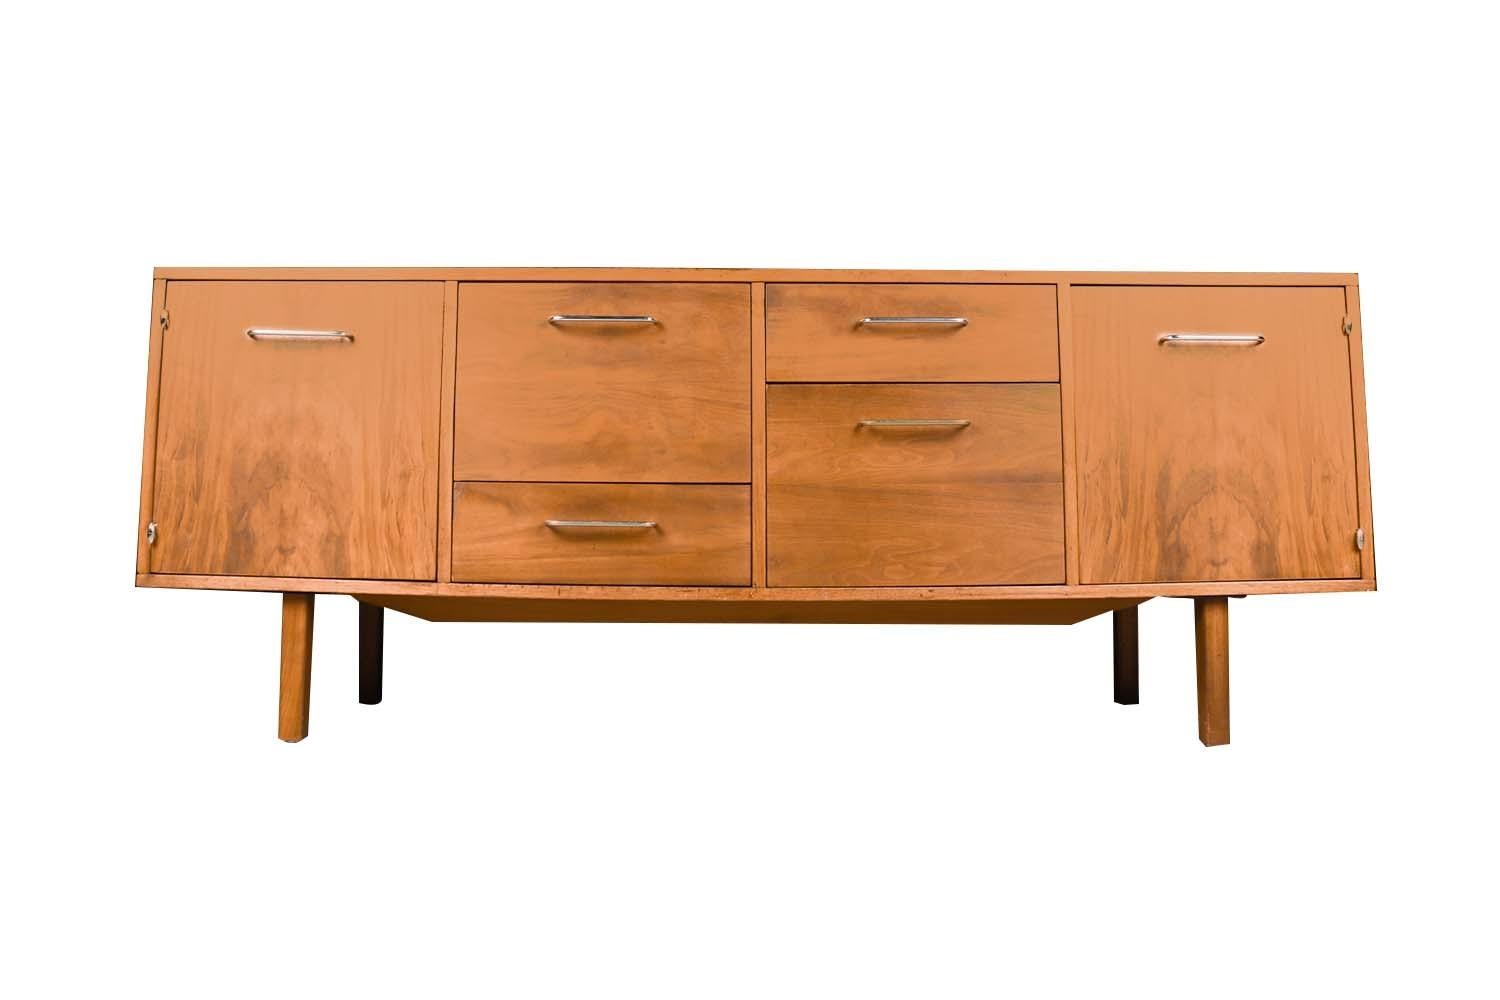 An exceptional and solid mid-century walnut file cabinet/credenza by B. L. Marble Furniture Company Jens Risom Style. This absolutely stunning piece features gorgeous walnut wood grain, stylish metal pulls and door hinges, a low profile, and sits